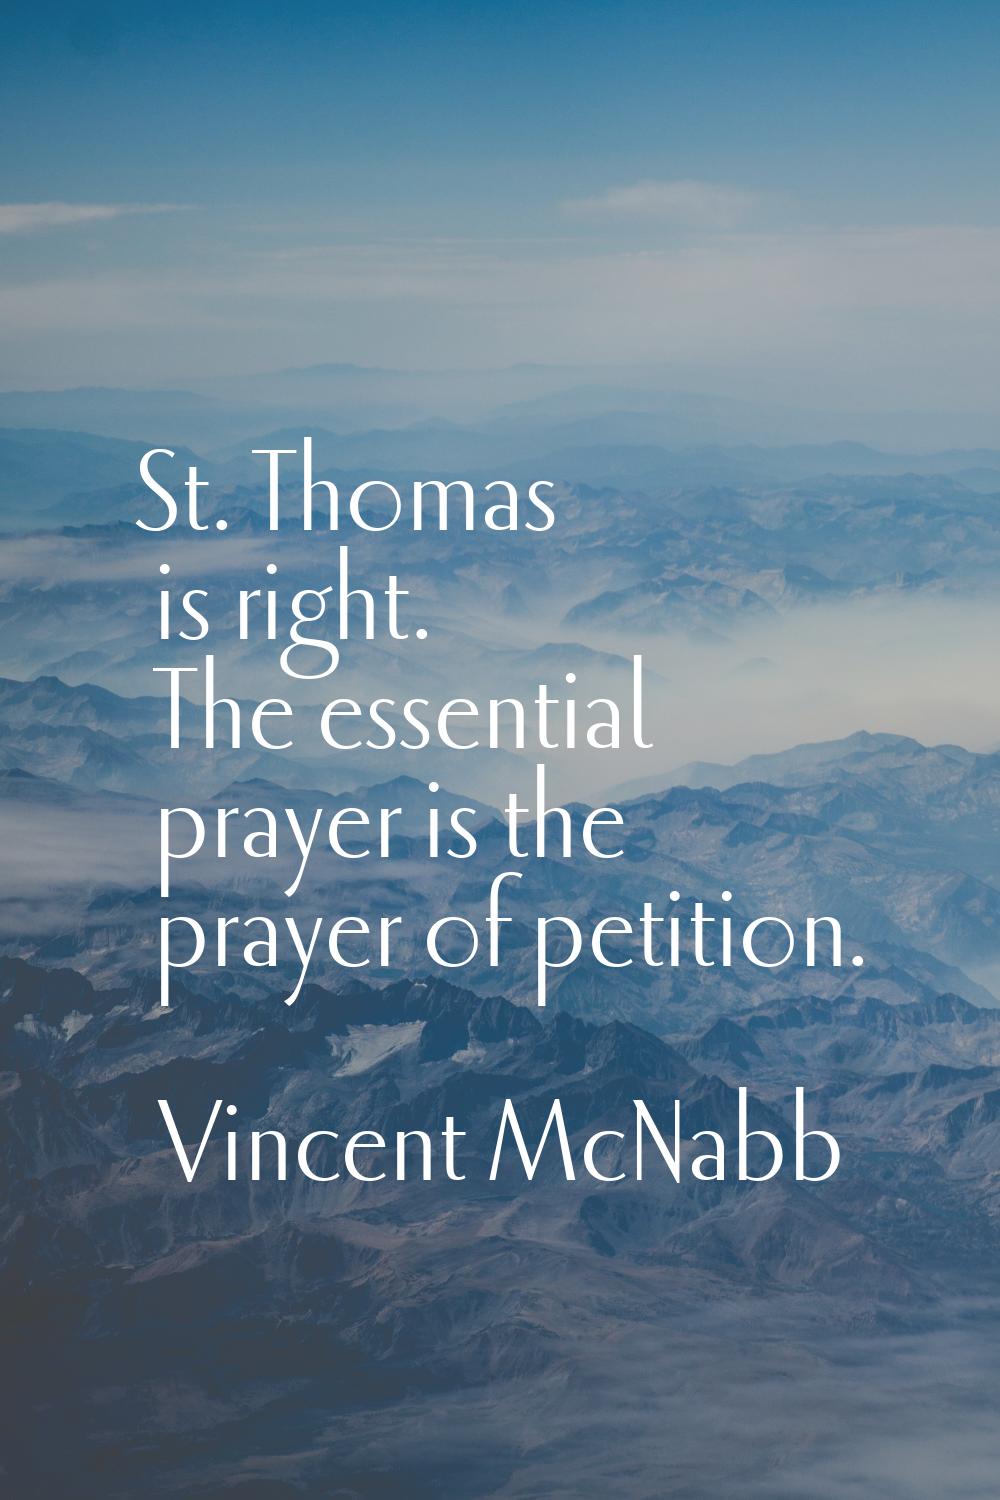 St. Thomas is right. The essential prayer is the prayer of petition.